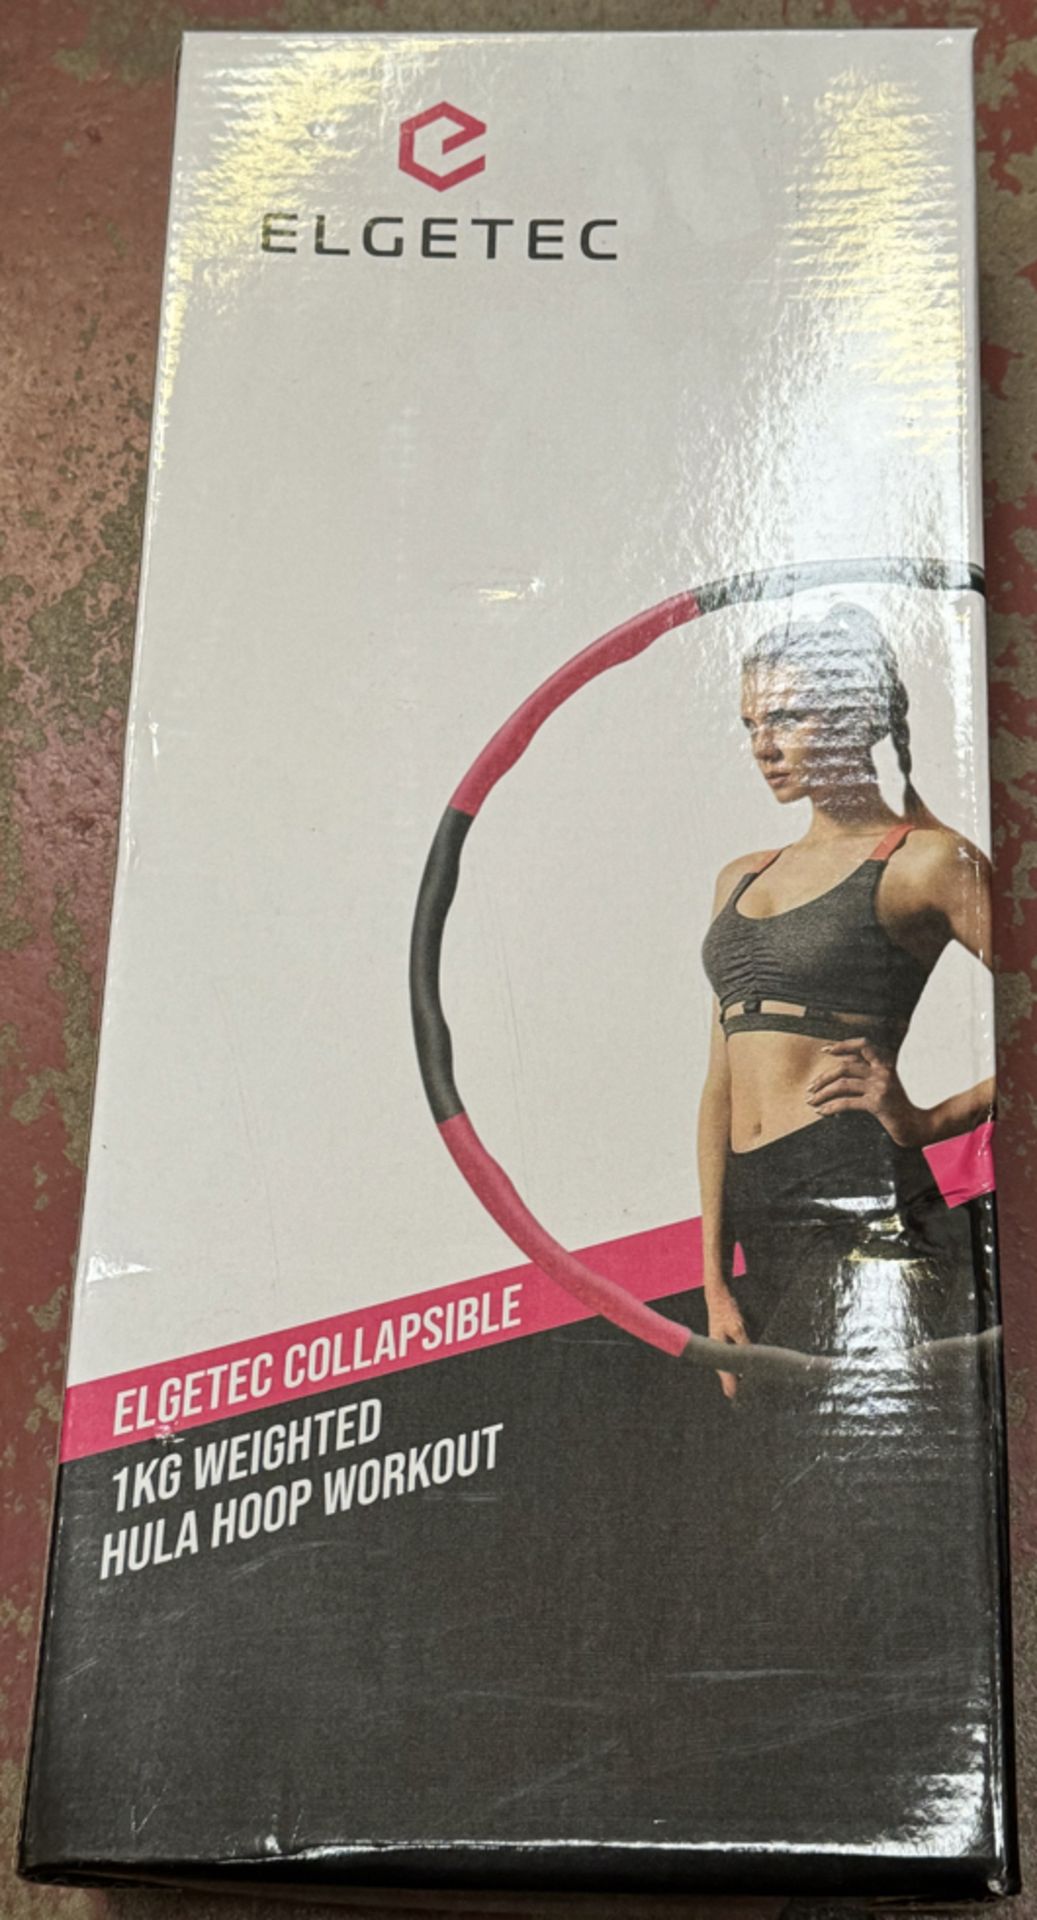 Elgetec Collapsible 1kg Weighted Hula Hoop - BRAND NEW & BOXED